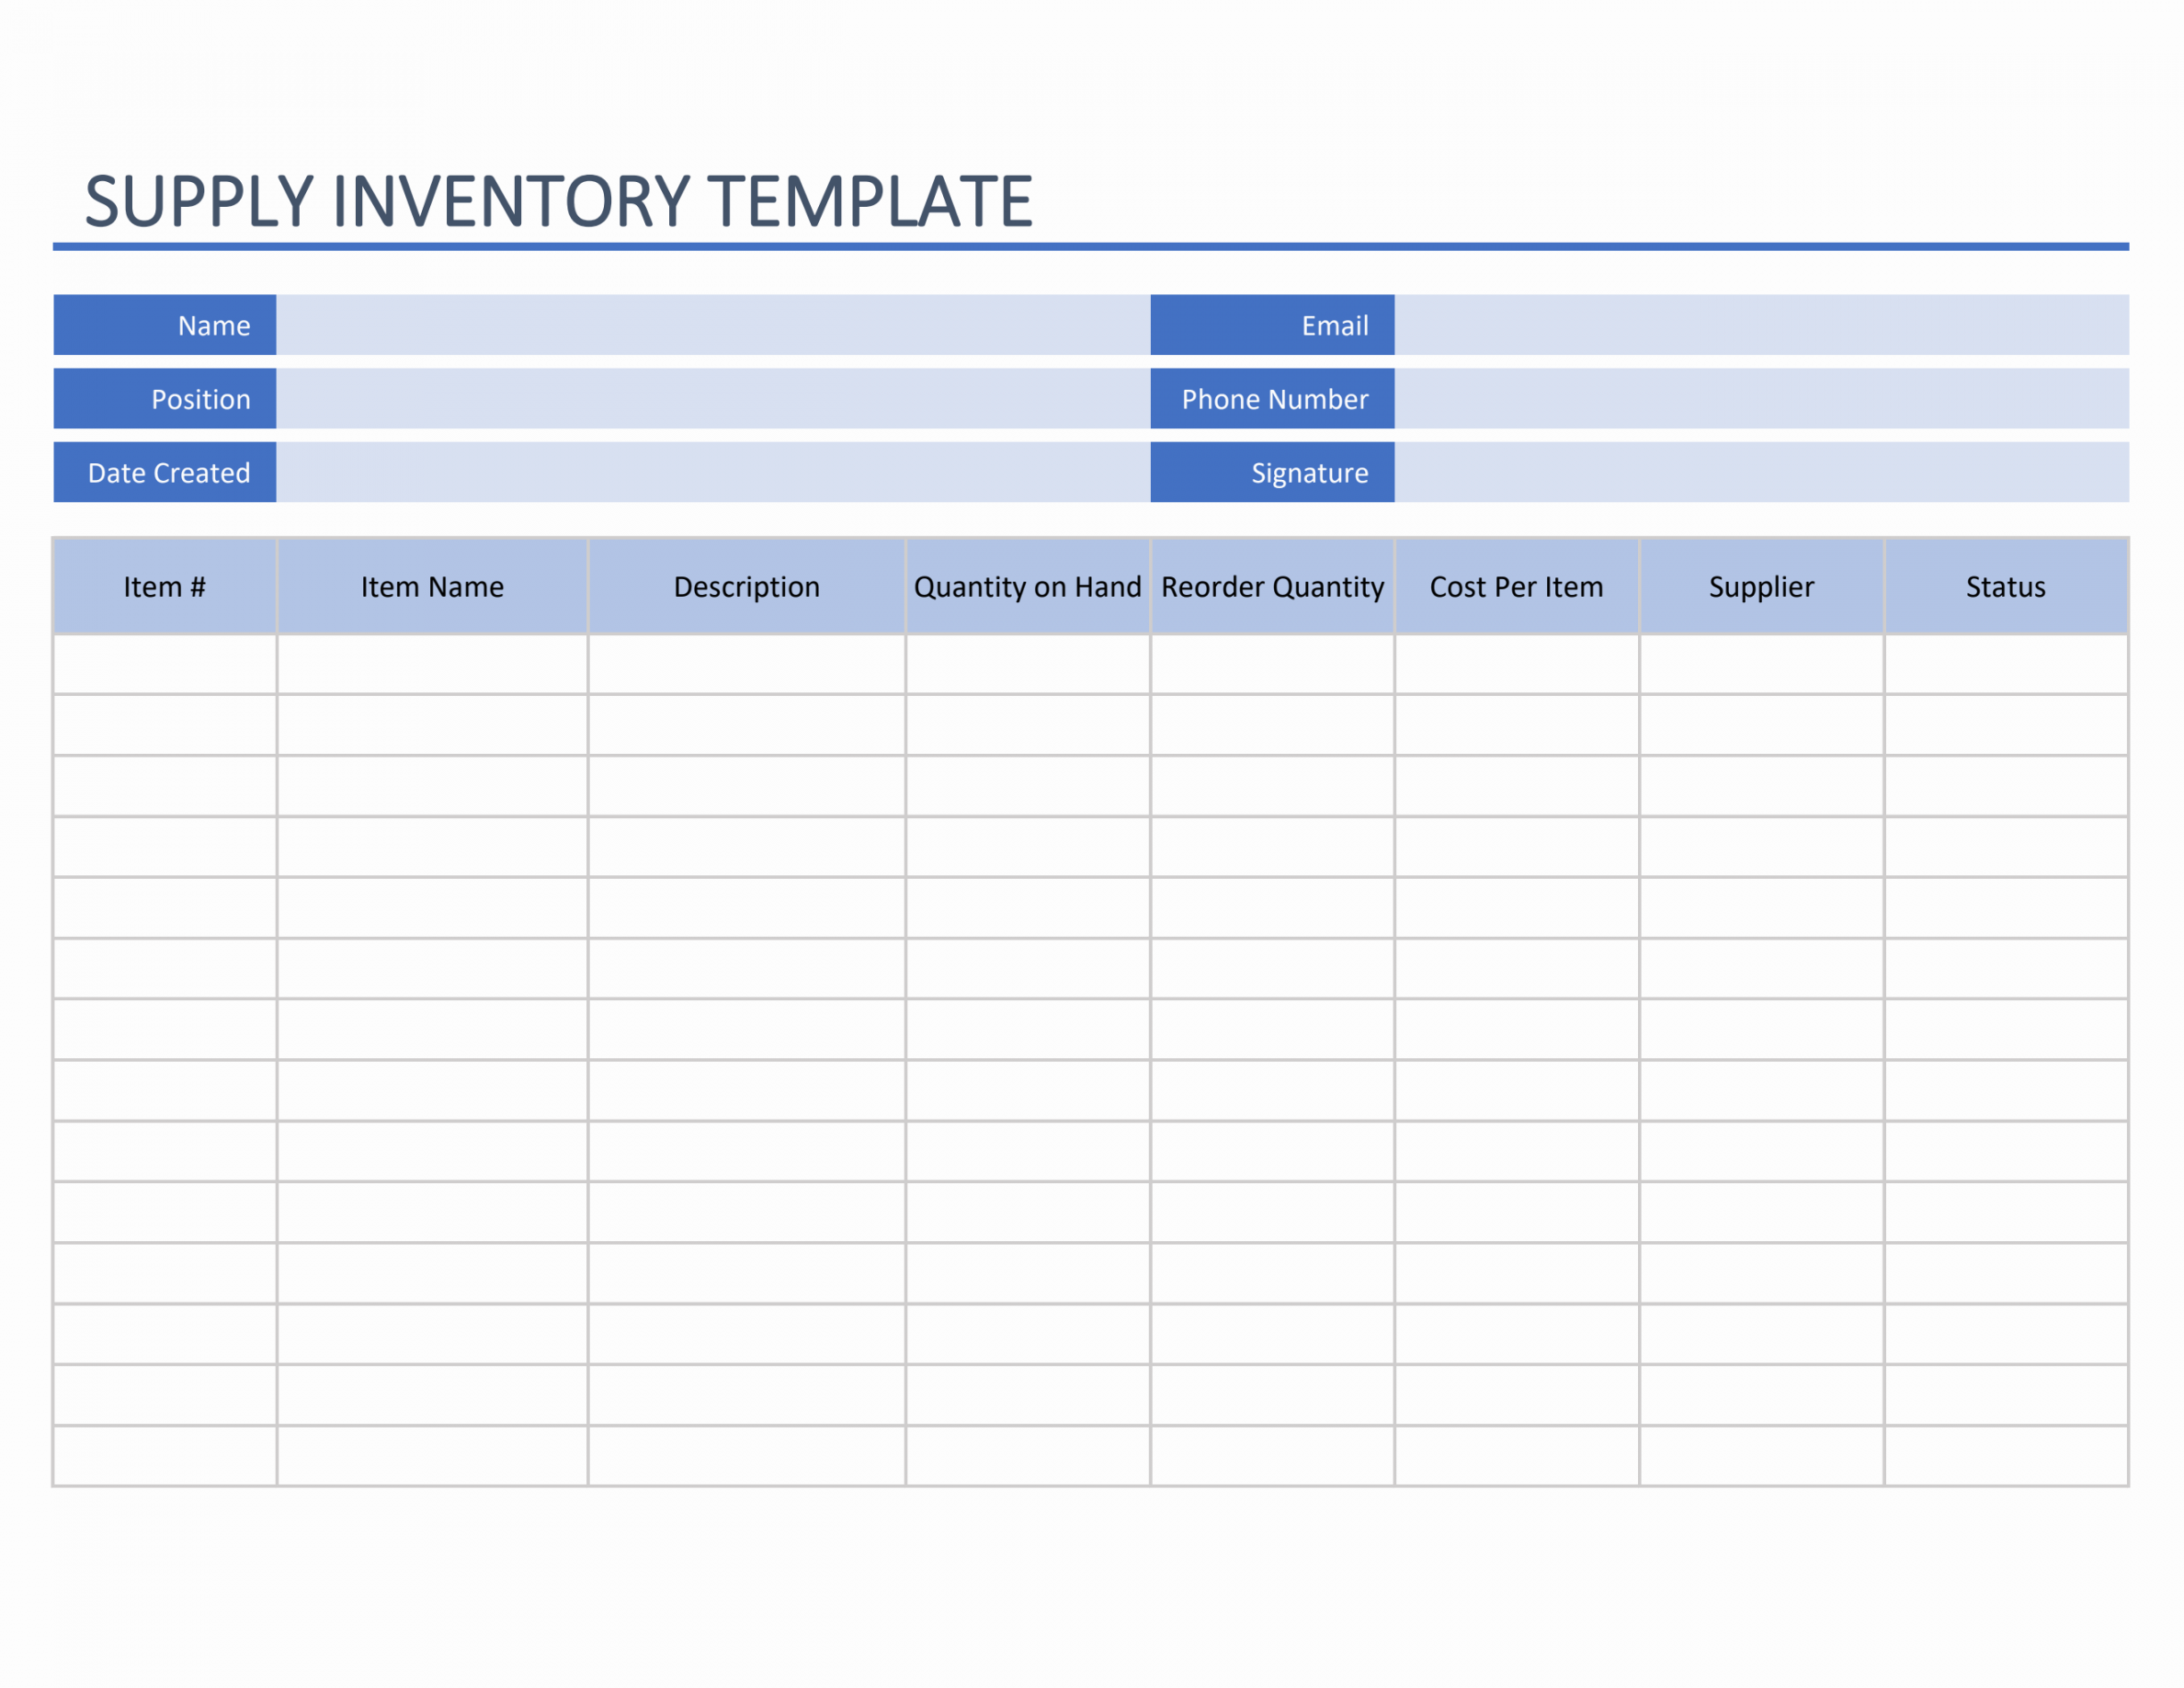 Excel Supply Inventory Template - FREE Printables - Supply Inventory Free Printable Inventory Sheets